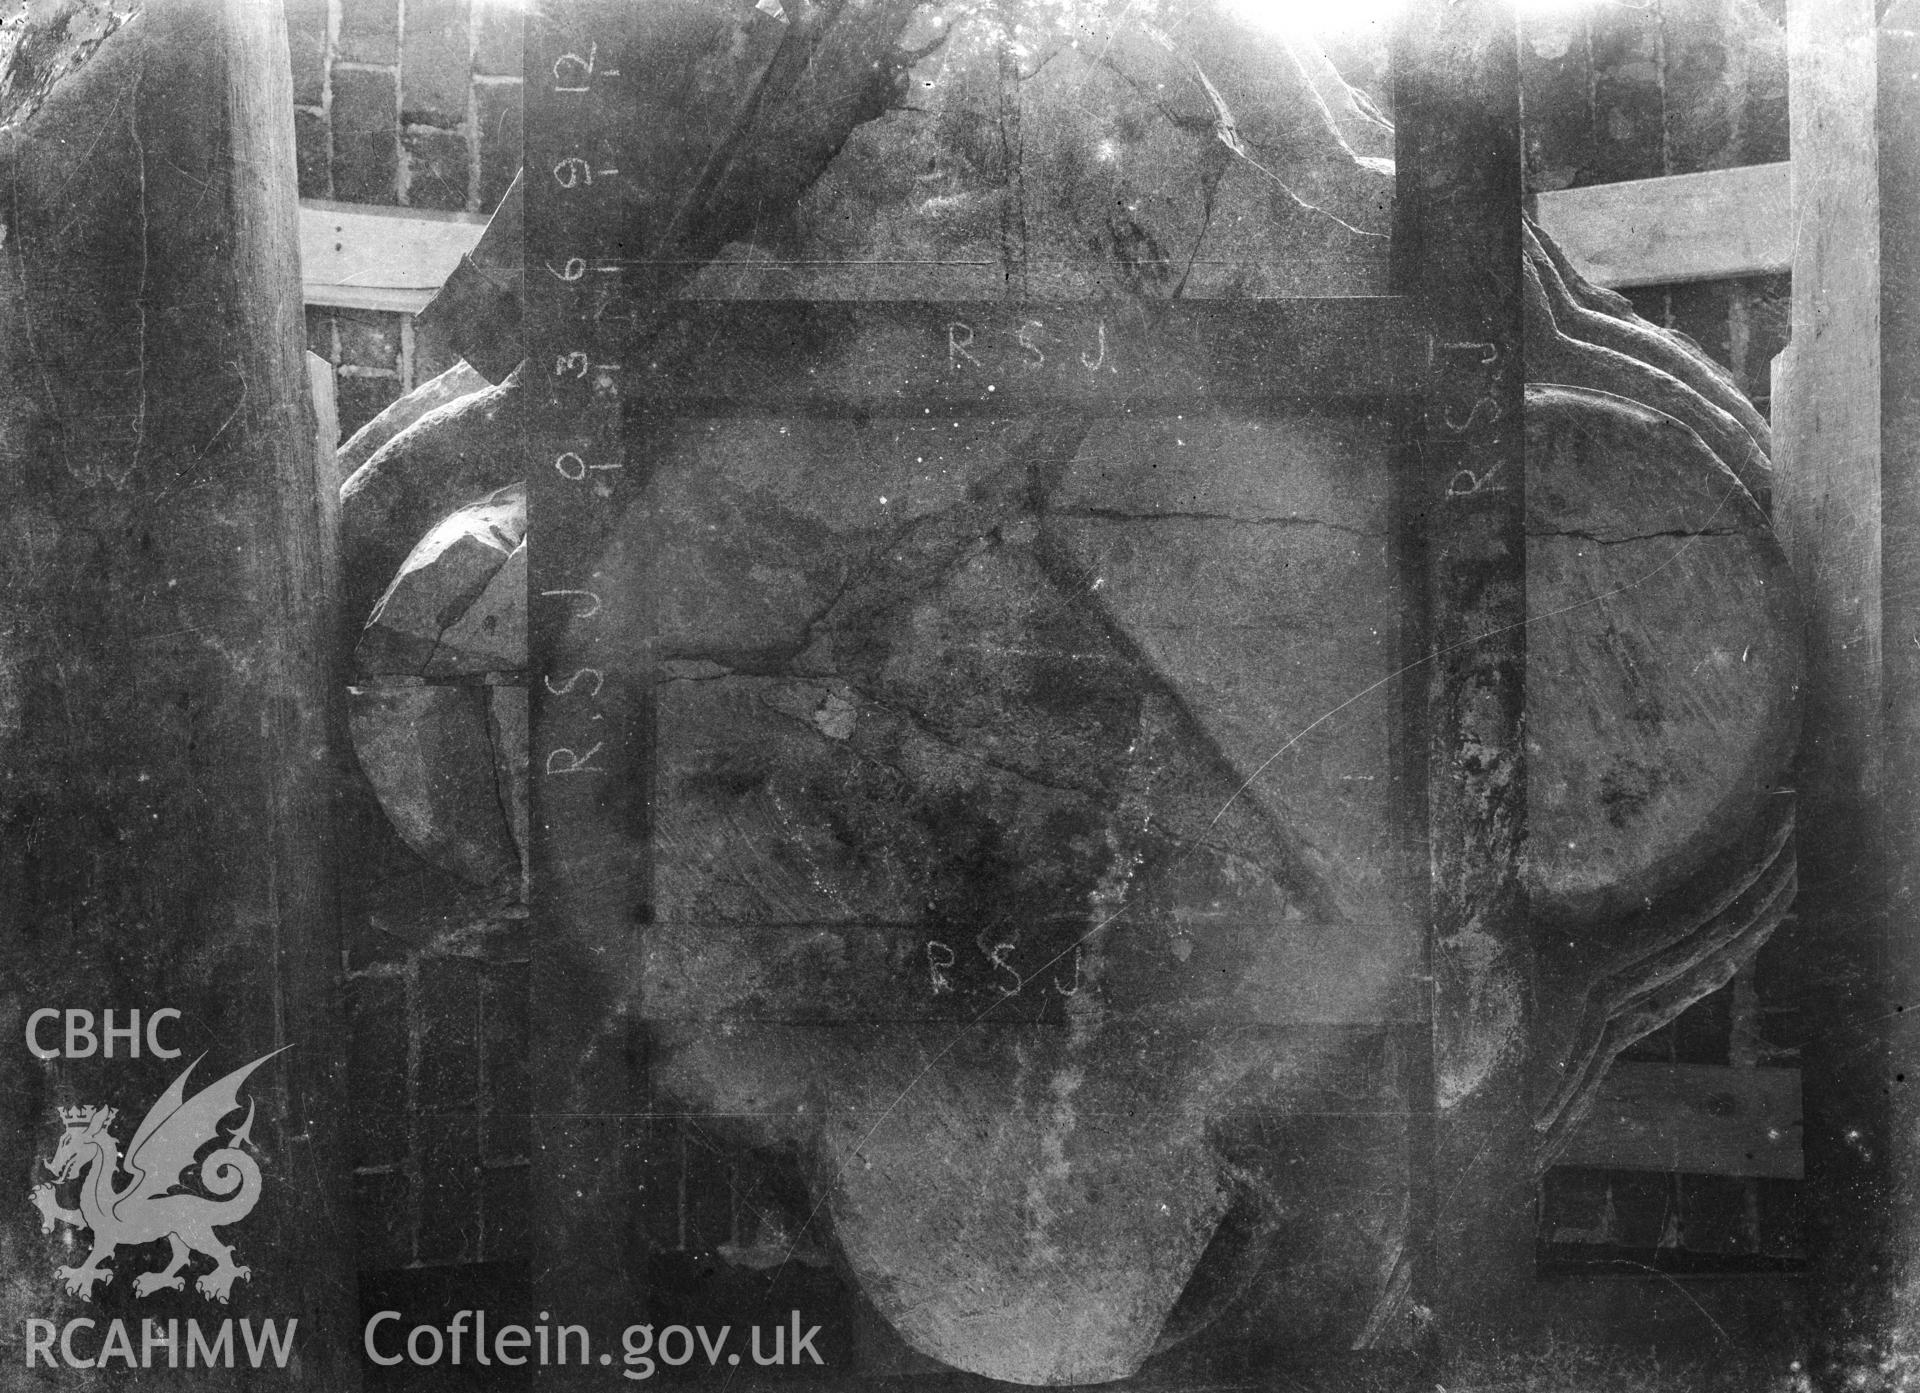 D.O.E. black and white negative of Tintern Abbey: showing section through stone pillars. Noted as a pre-D.O.E. photograph.